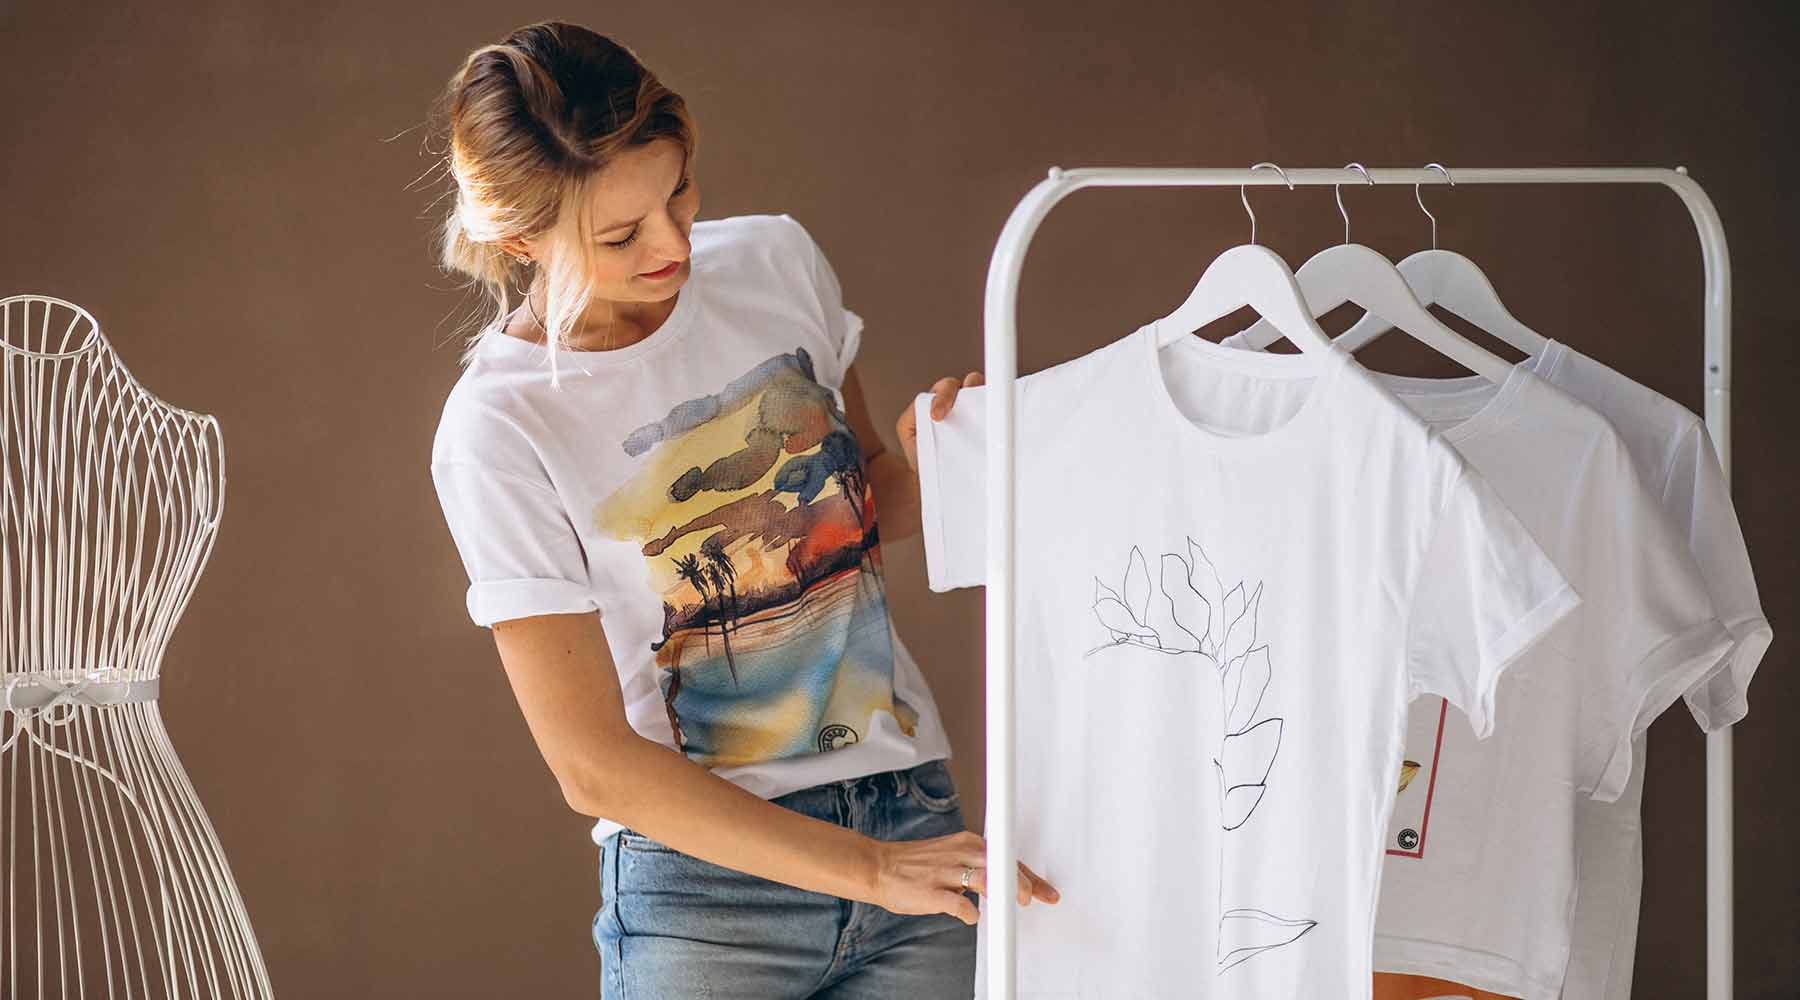 How to Sell T-Shirts Online: 10 Successful Steps to Start